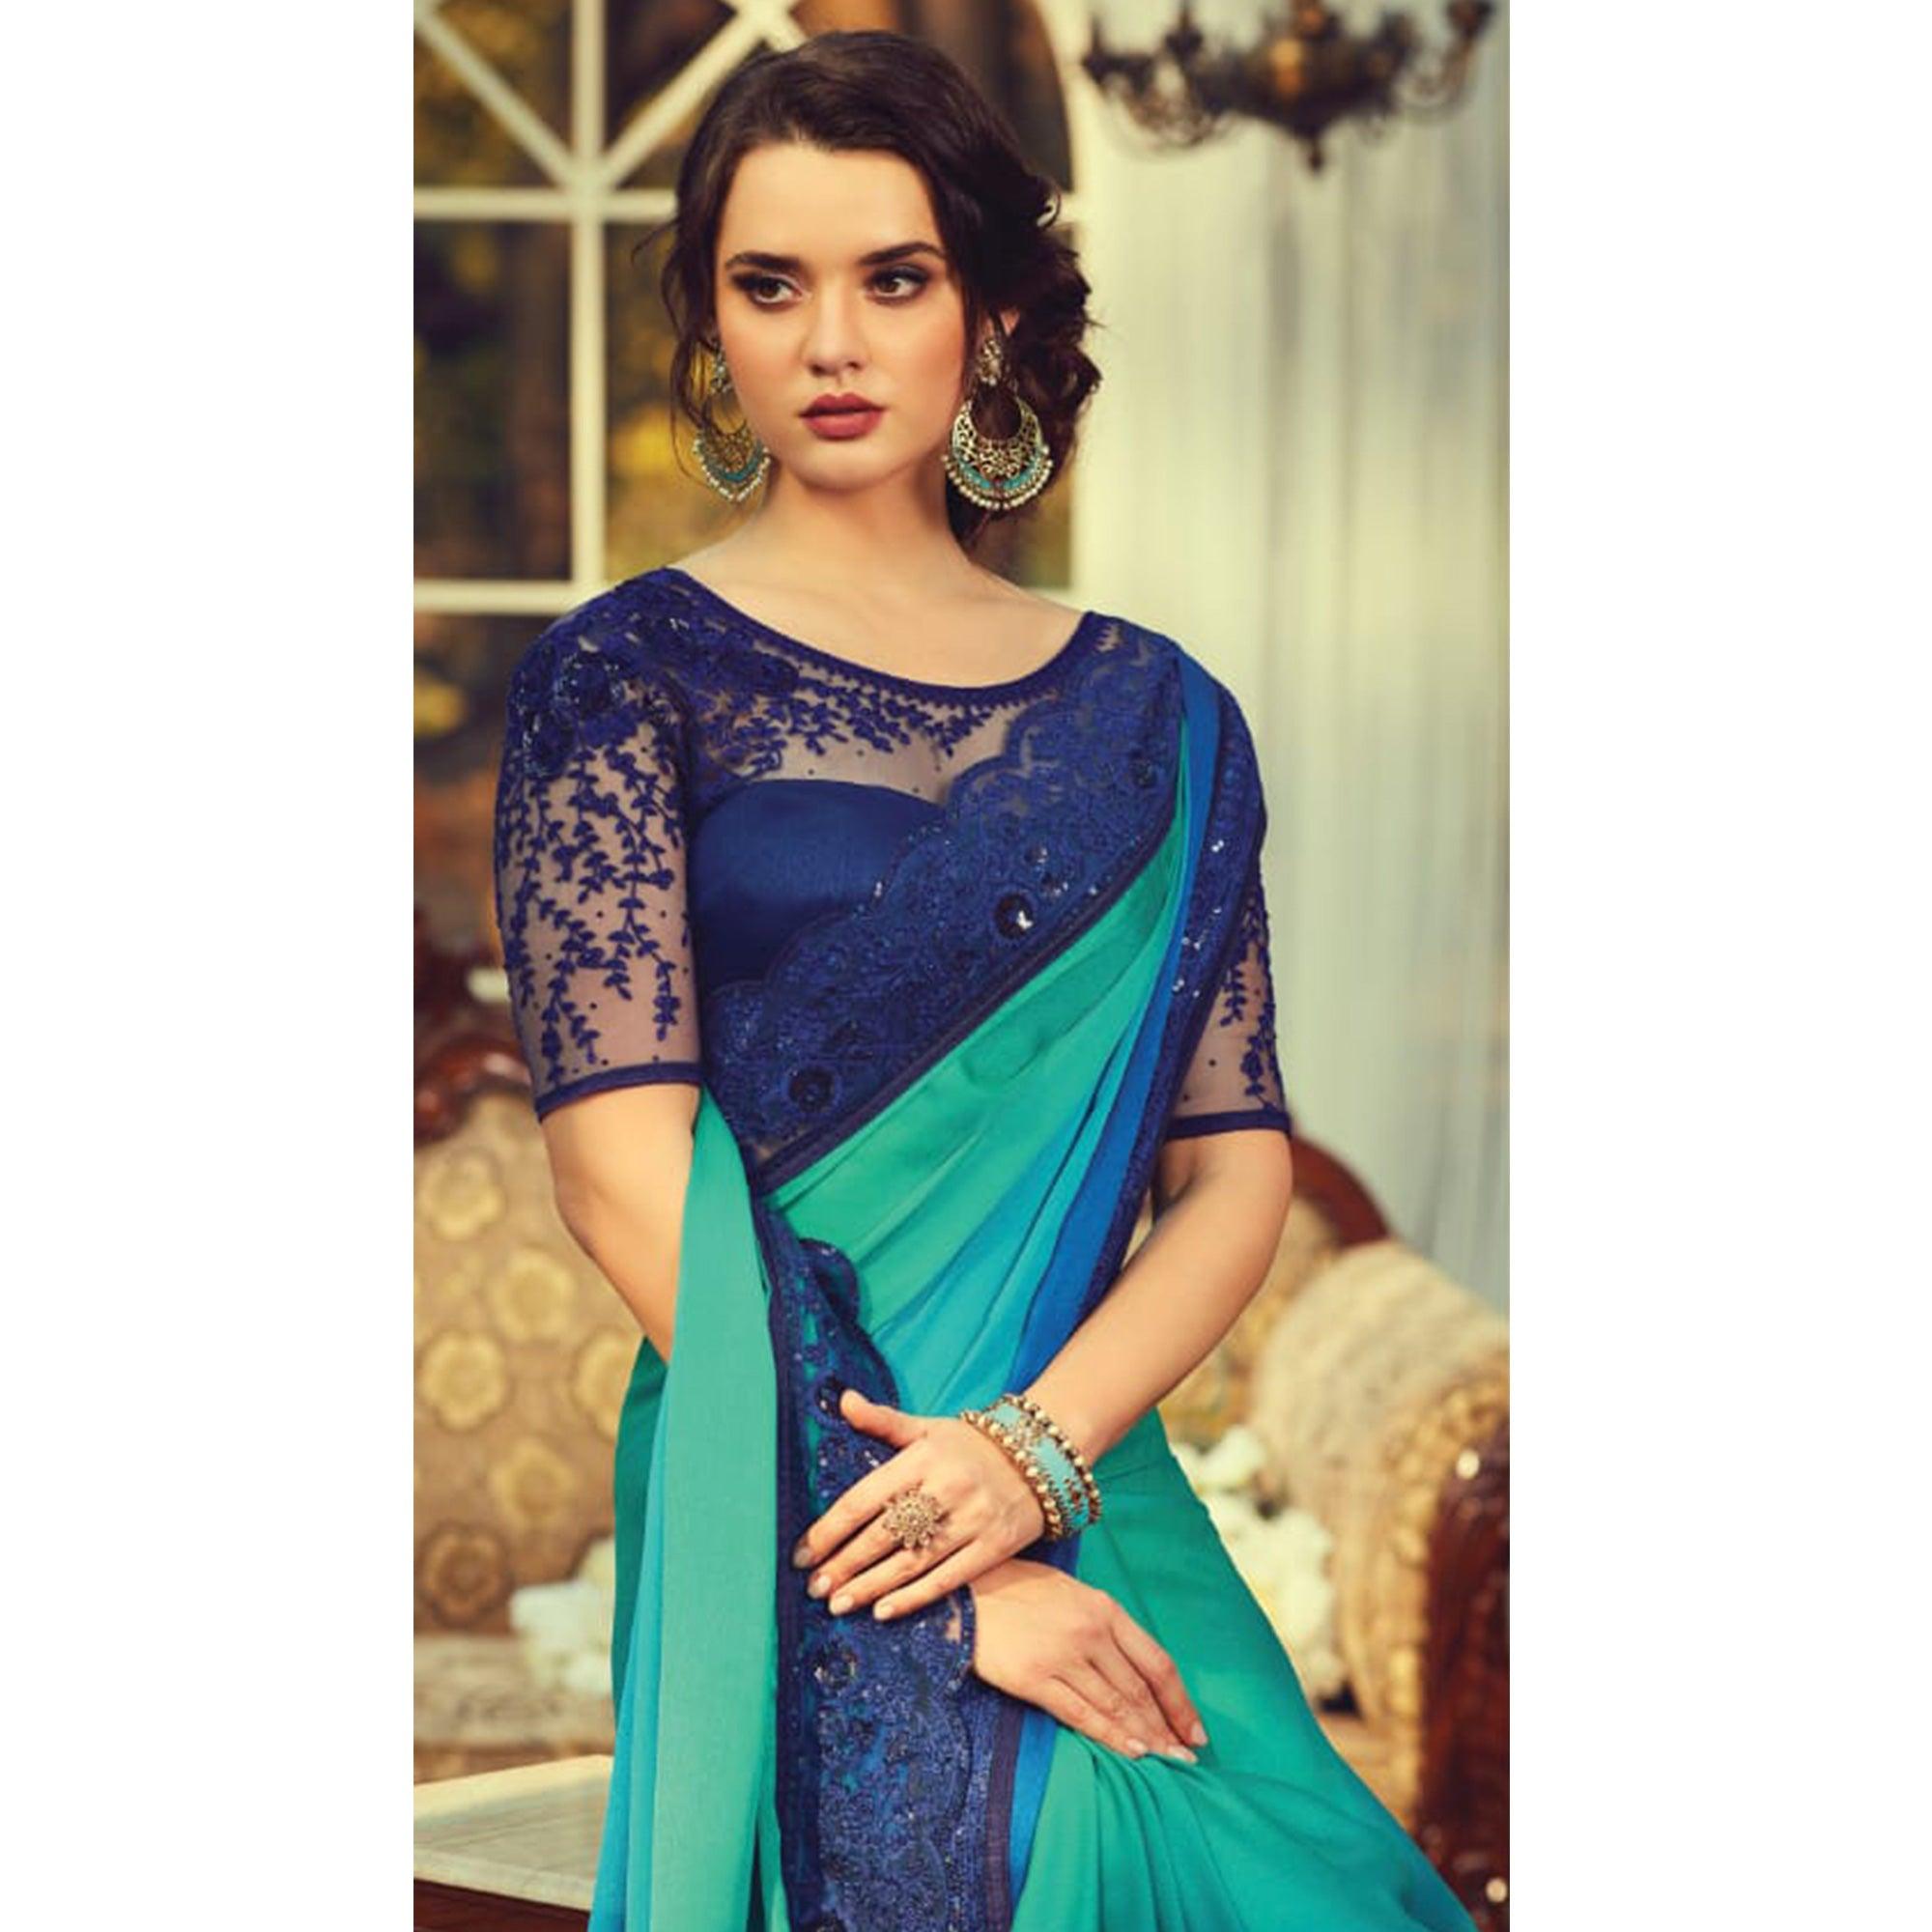 Exclusive Turquoise Green - Blue Colored Partywear Embroidered Silk Saree - Peachmode